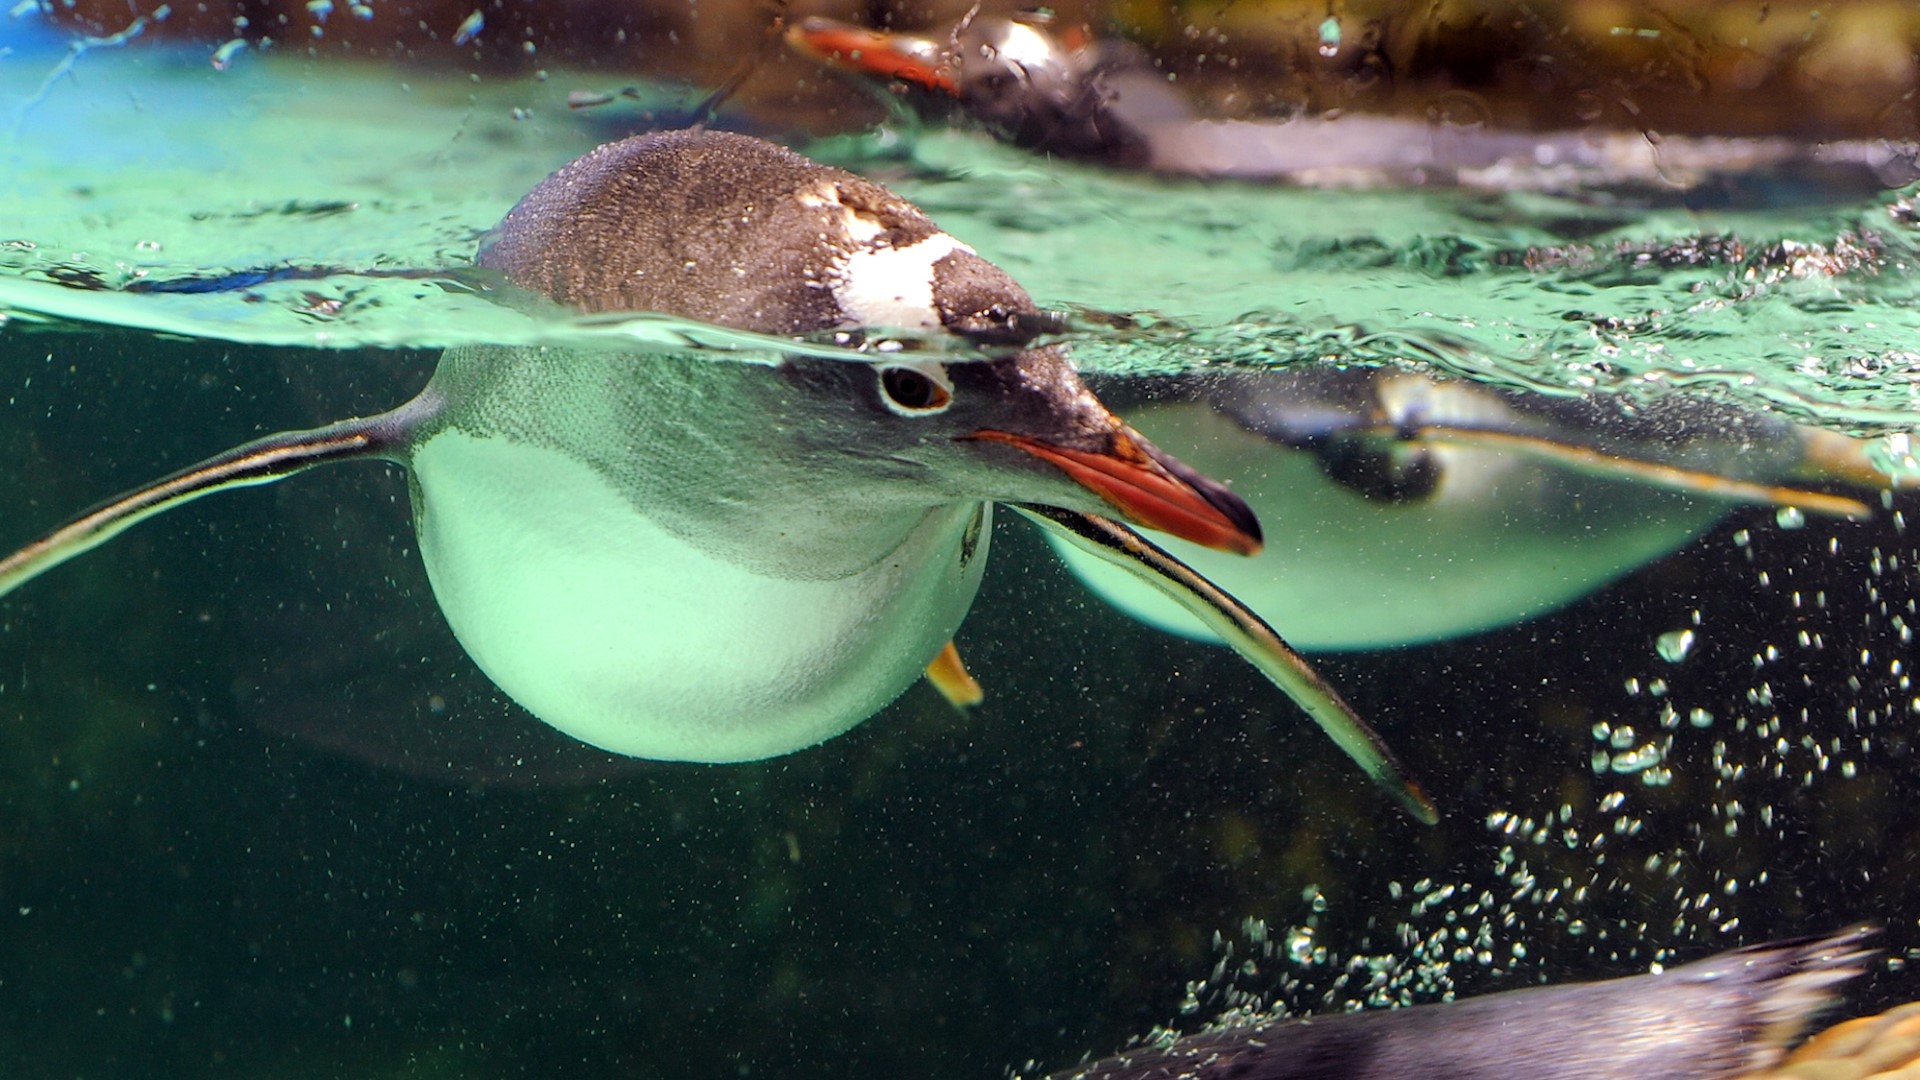 Scientists knew penguins make sounds on land and when popping their heads above water, but there wasn't evidence of sea birds making vocalizations underwater... until now.